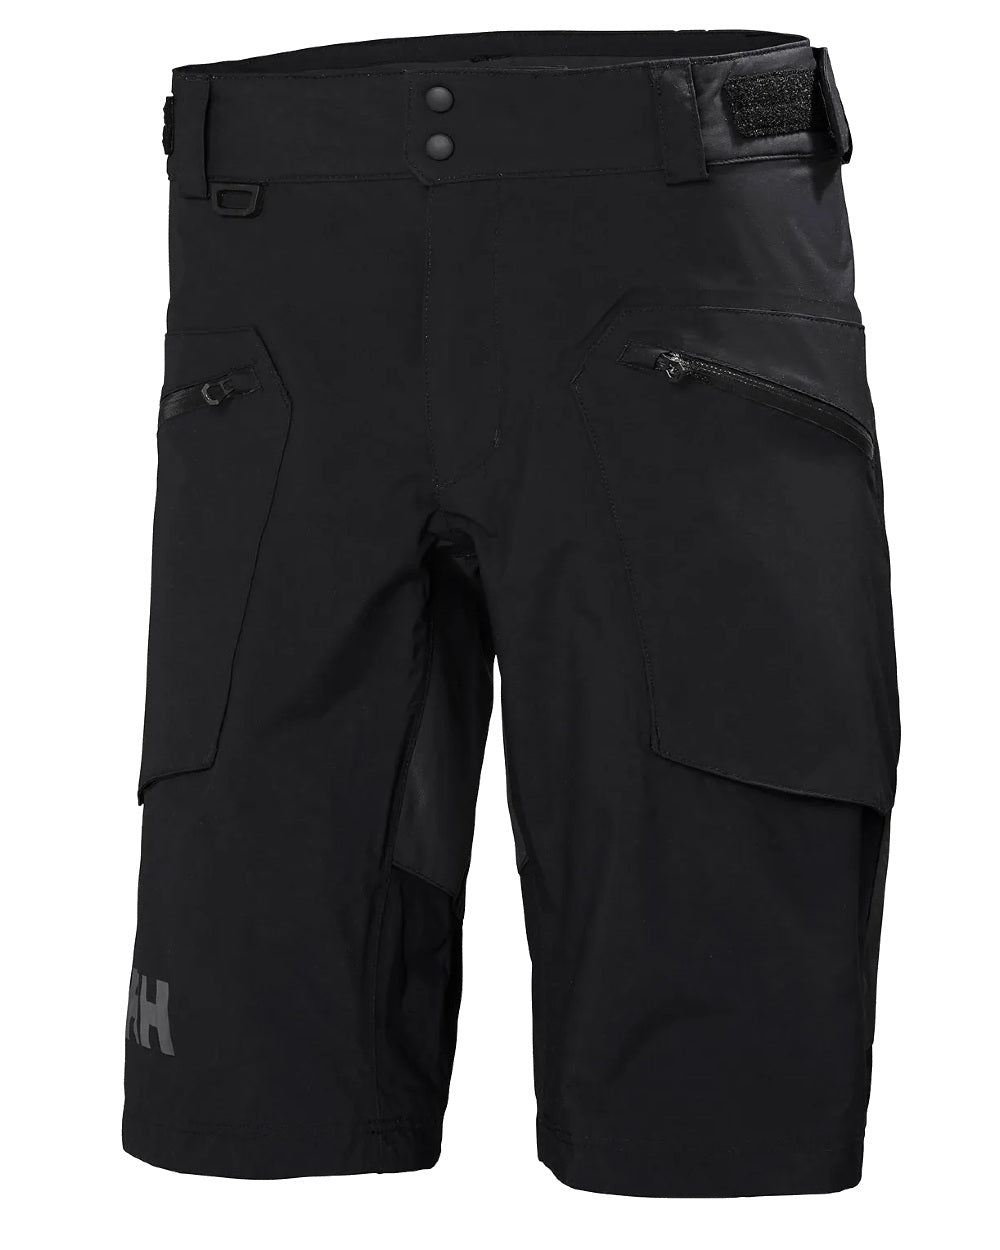 Black coloured Helly Hansen Mens HP Foil HT Waterproof Sailing Shorts on white background 